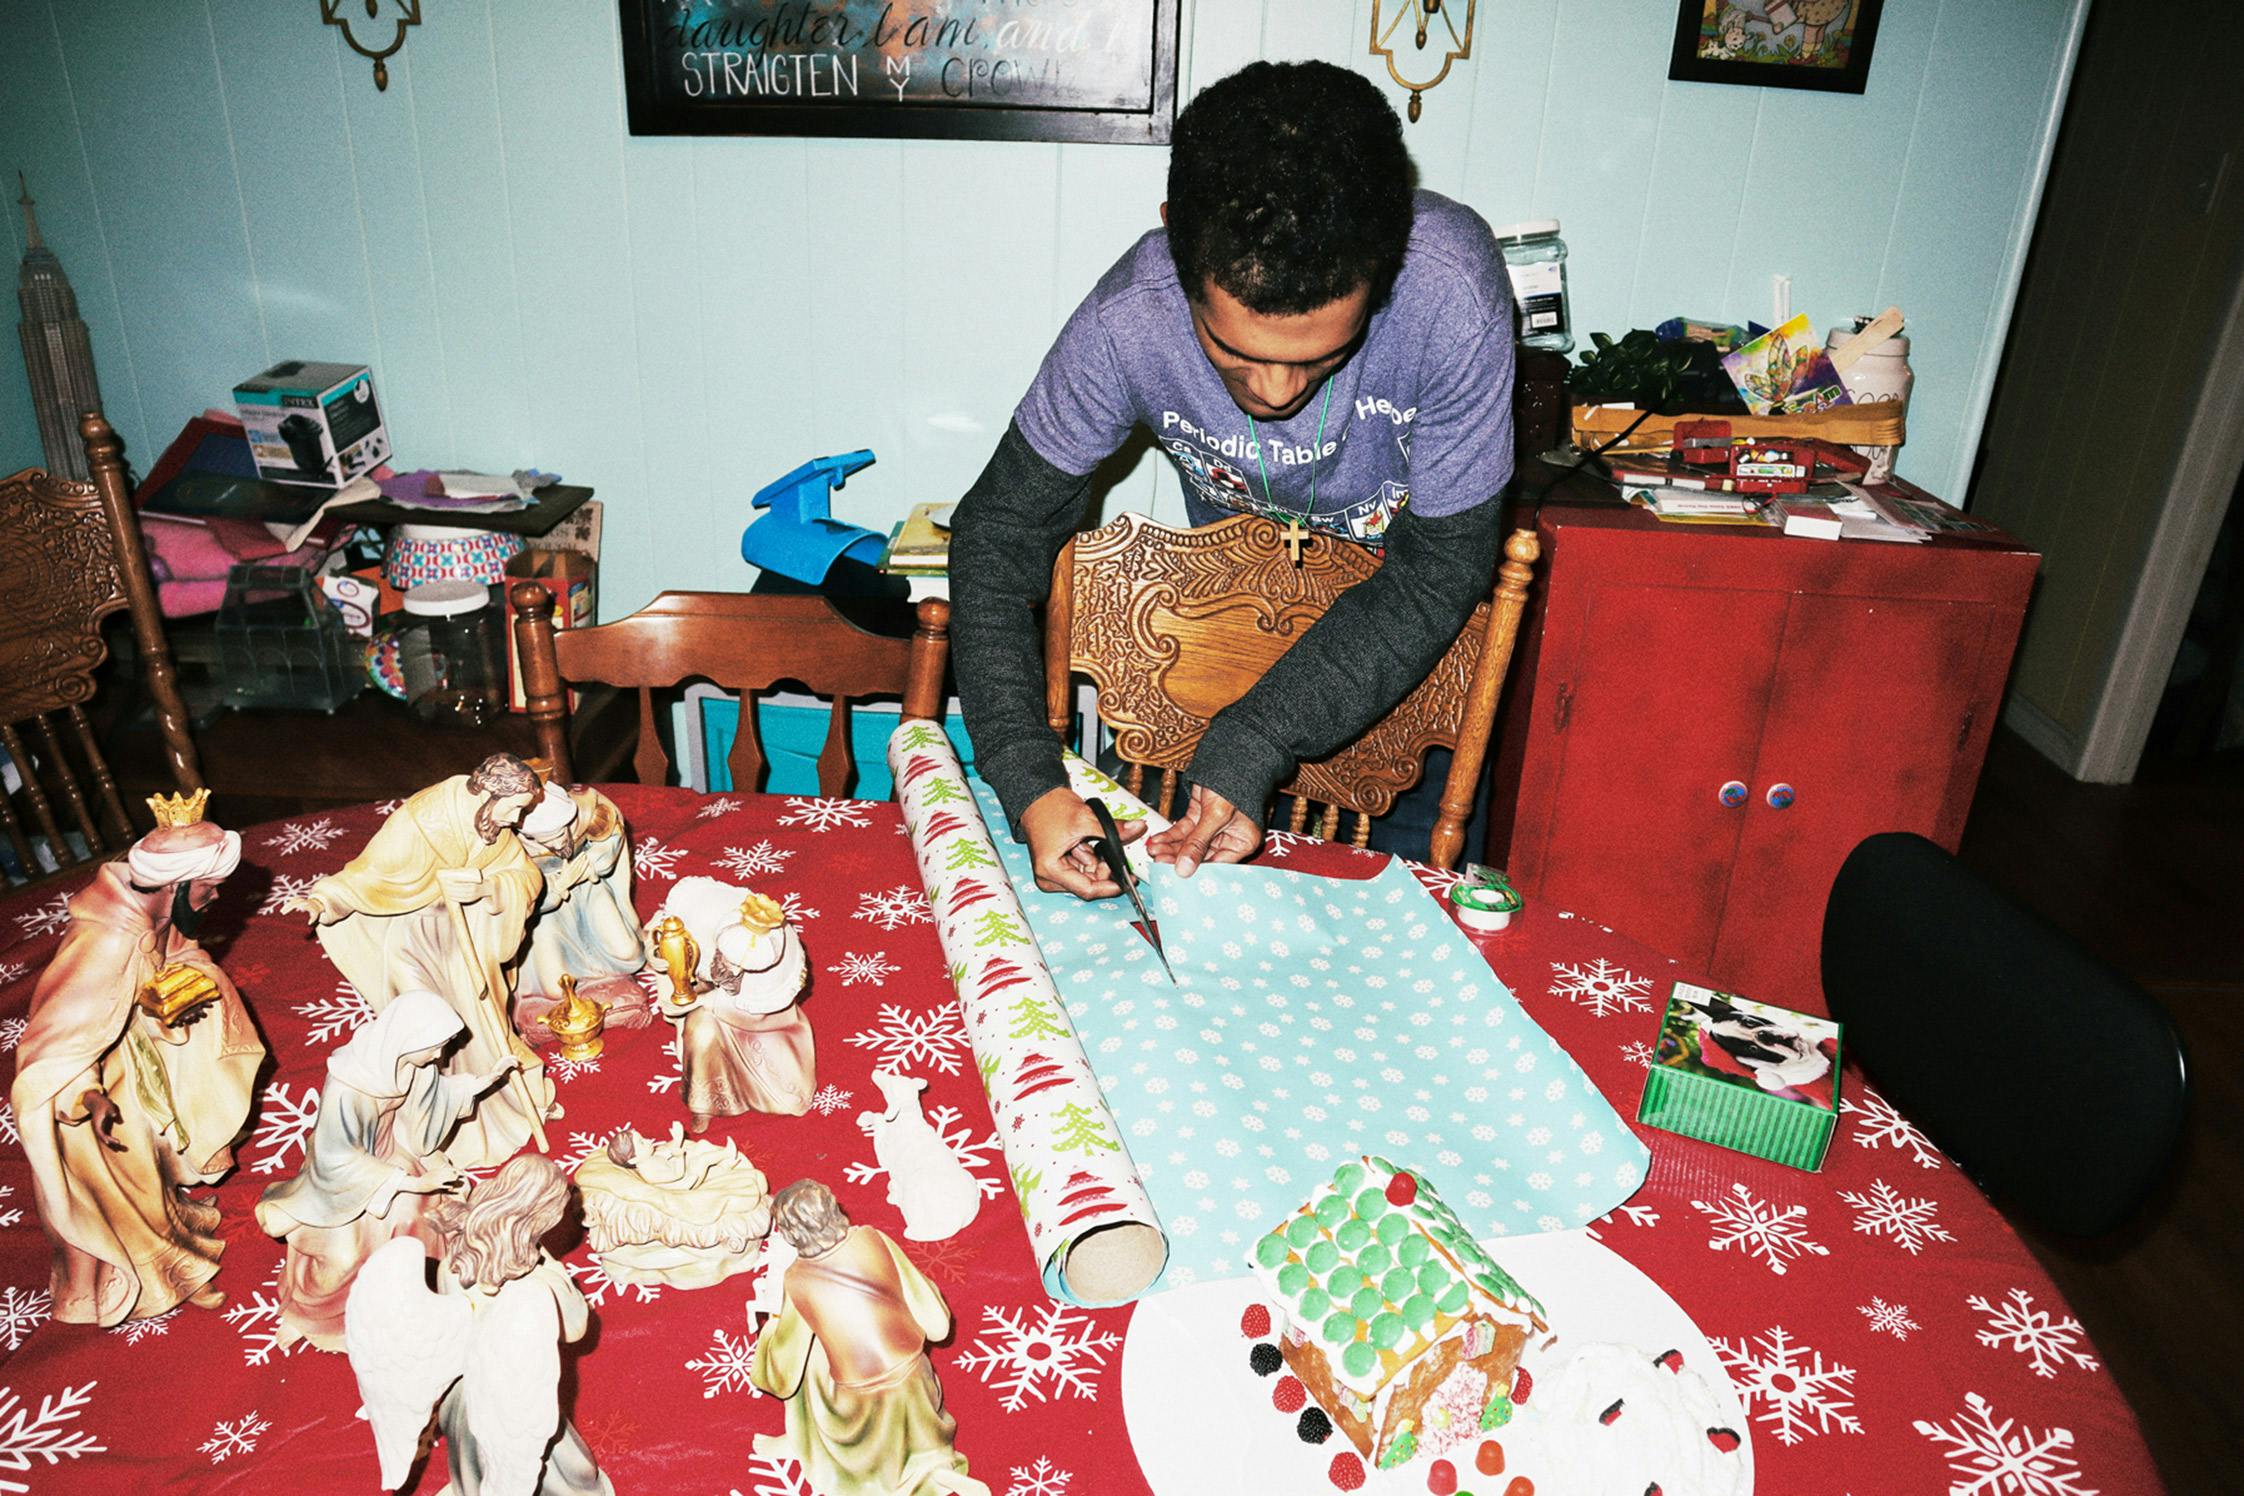 Chris cuts paper to wrap his Christmas gifts with.